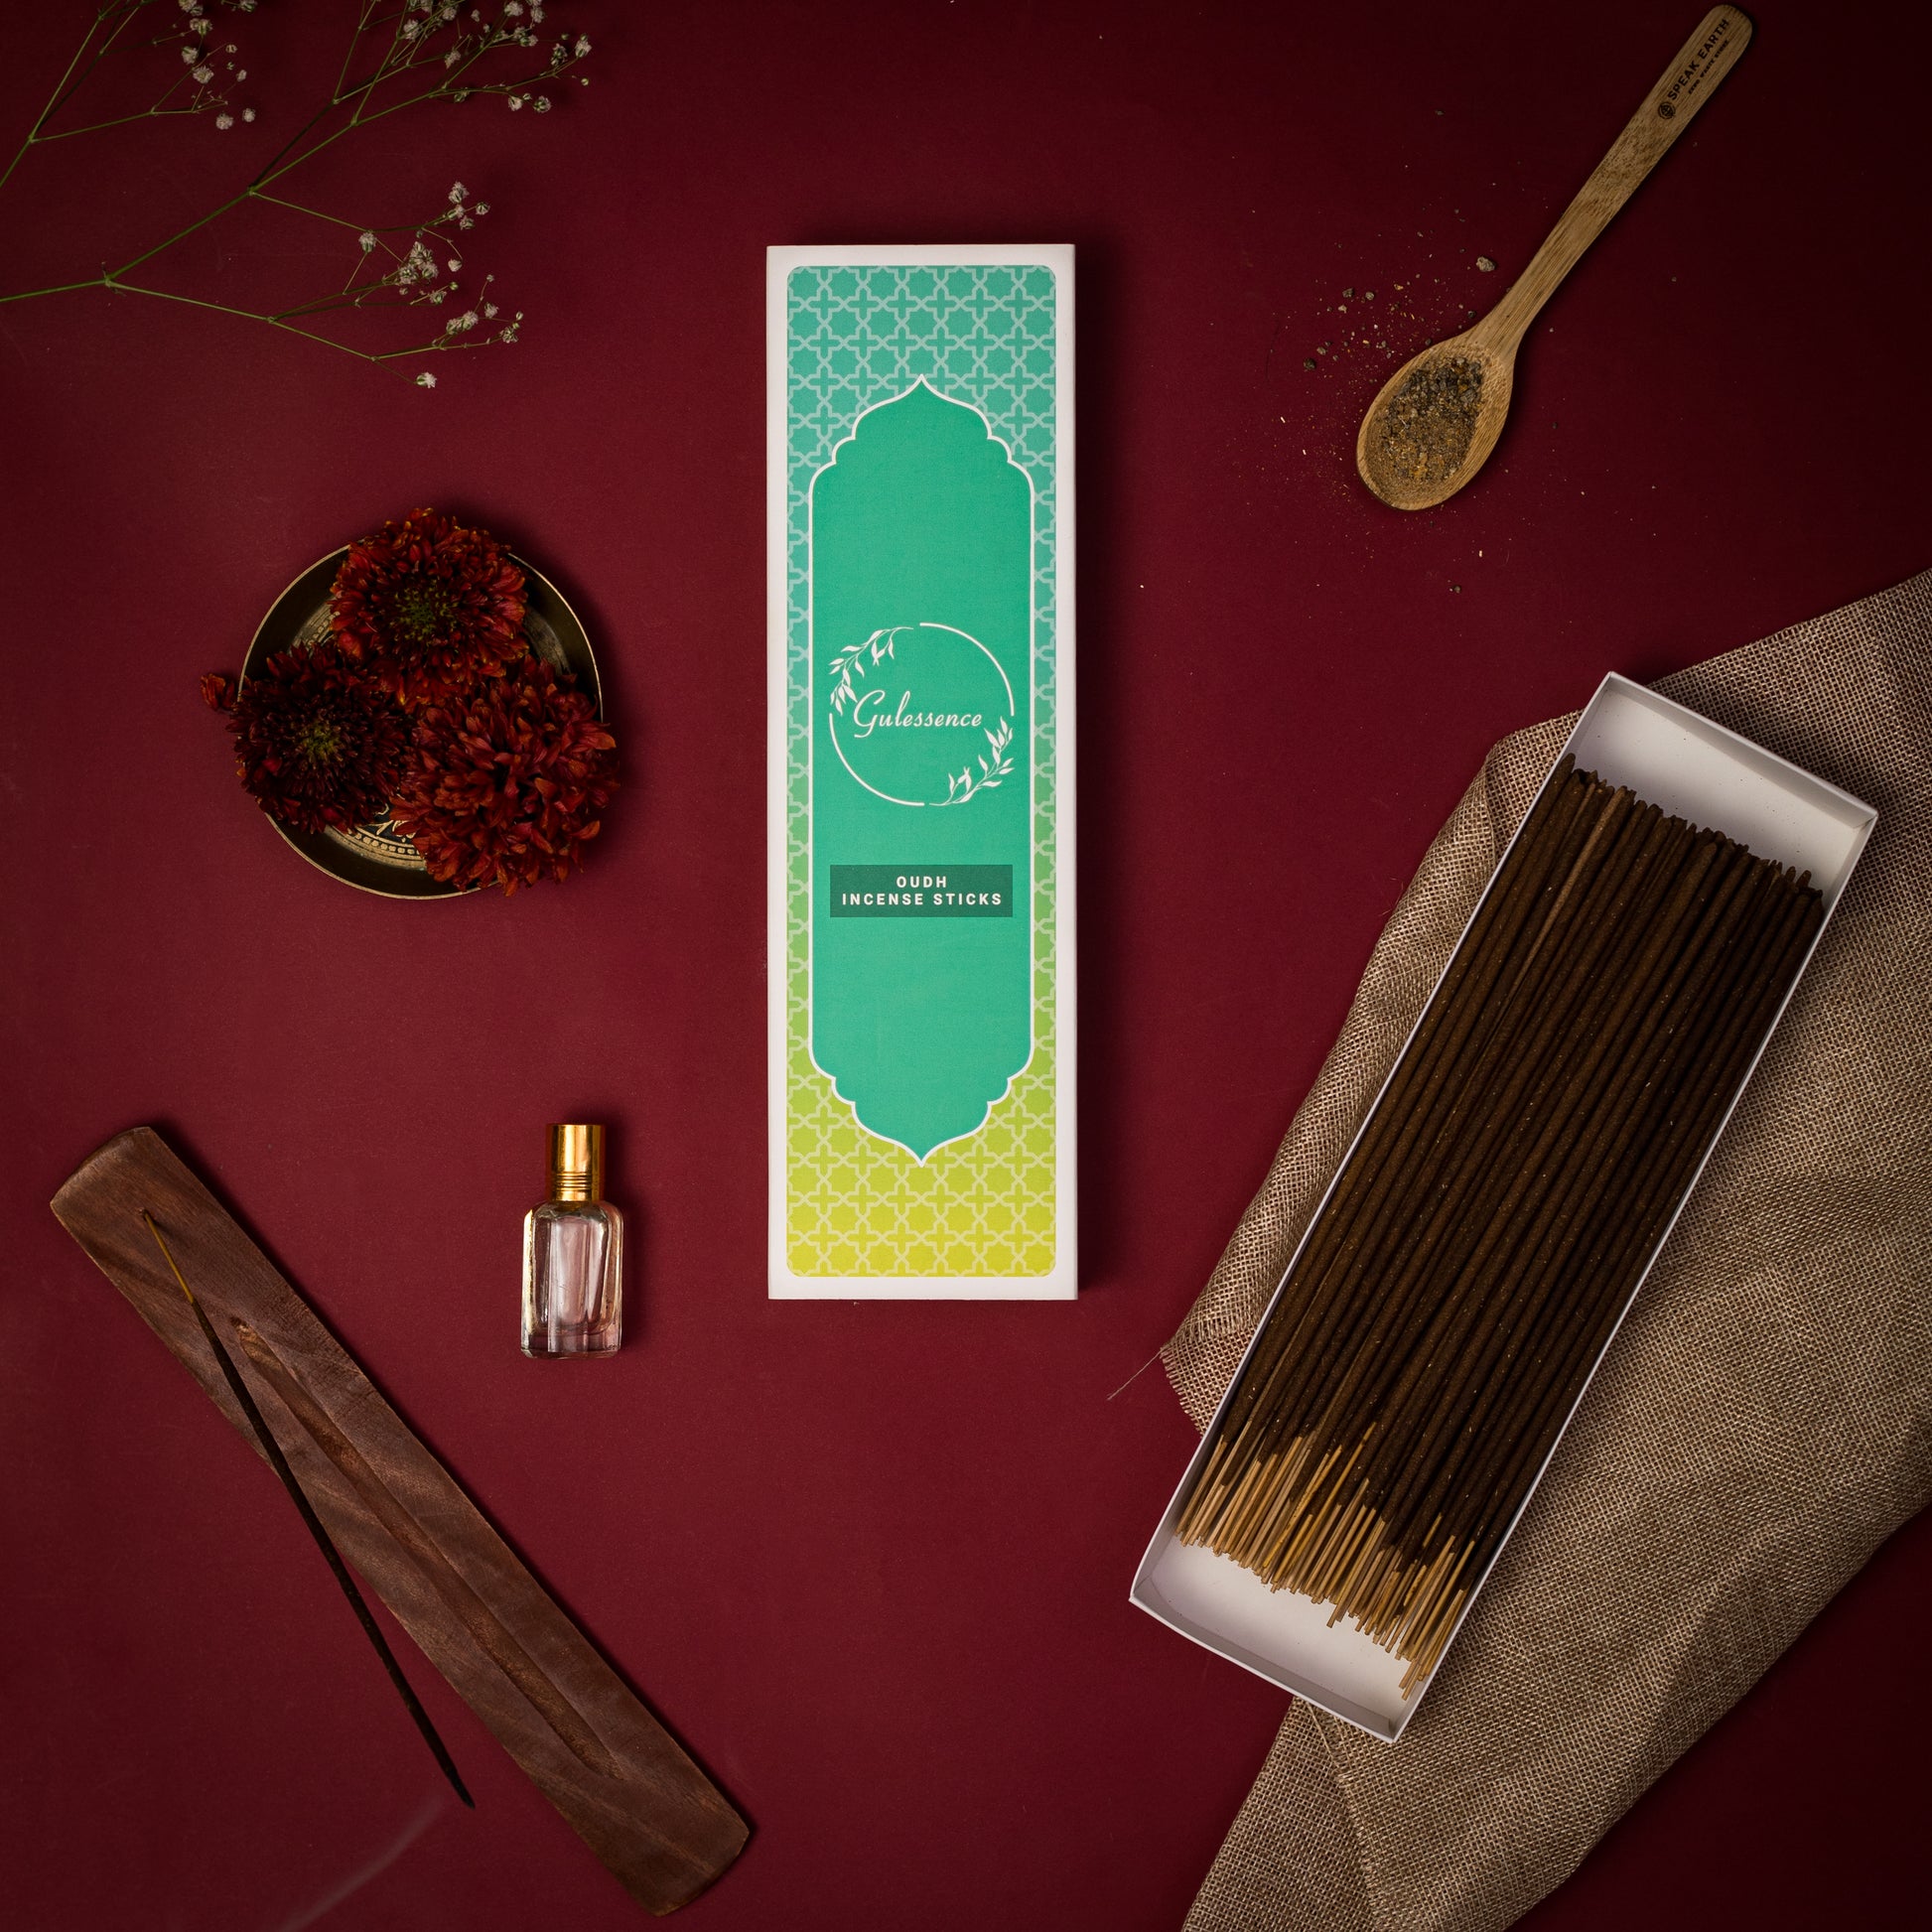 Sandalwood & Oudh Incense stick Petrichor - Made from Temple Flowers | Combo Boxes | Gulessence - Gulessence